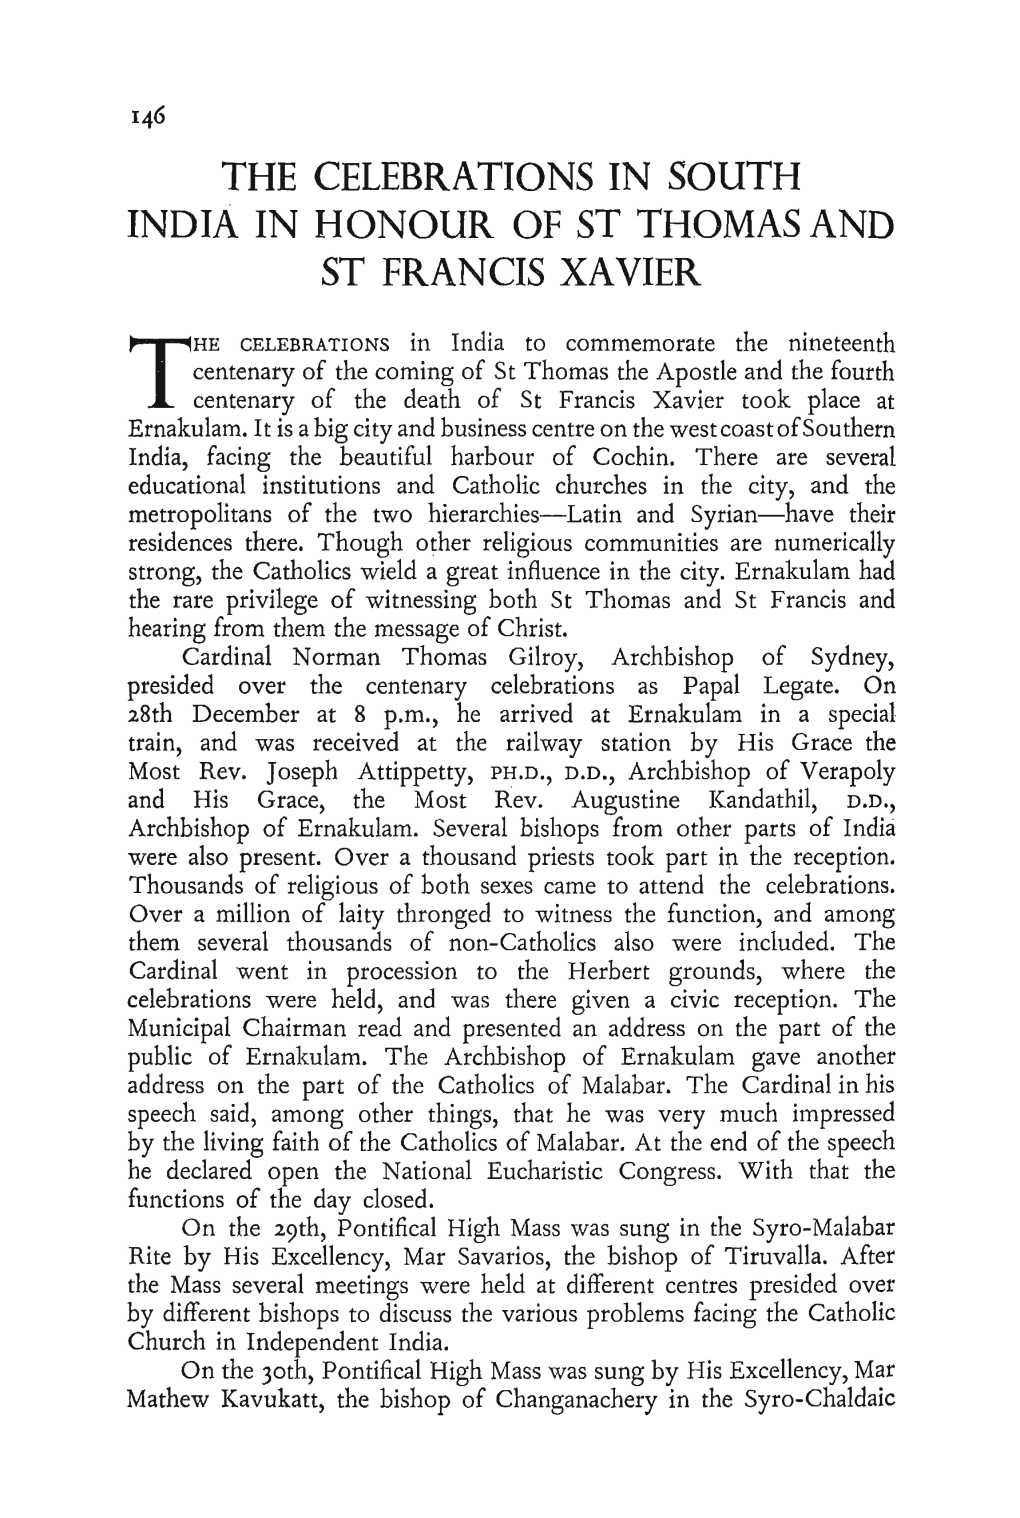 THE CELEBRATIONS in SOUTH INDIA in HONOUR of ST THOMAS Ant) ST FRANCIS XA VIER